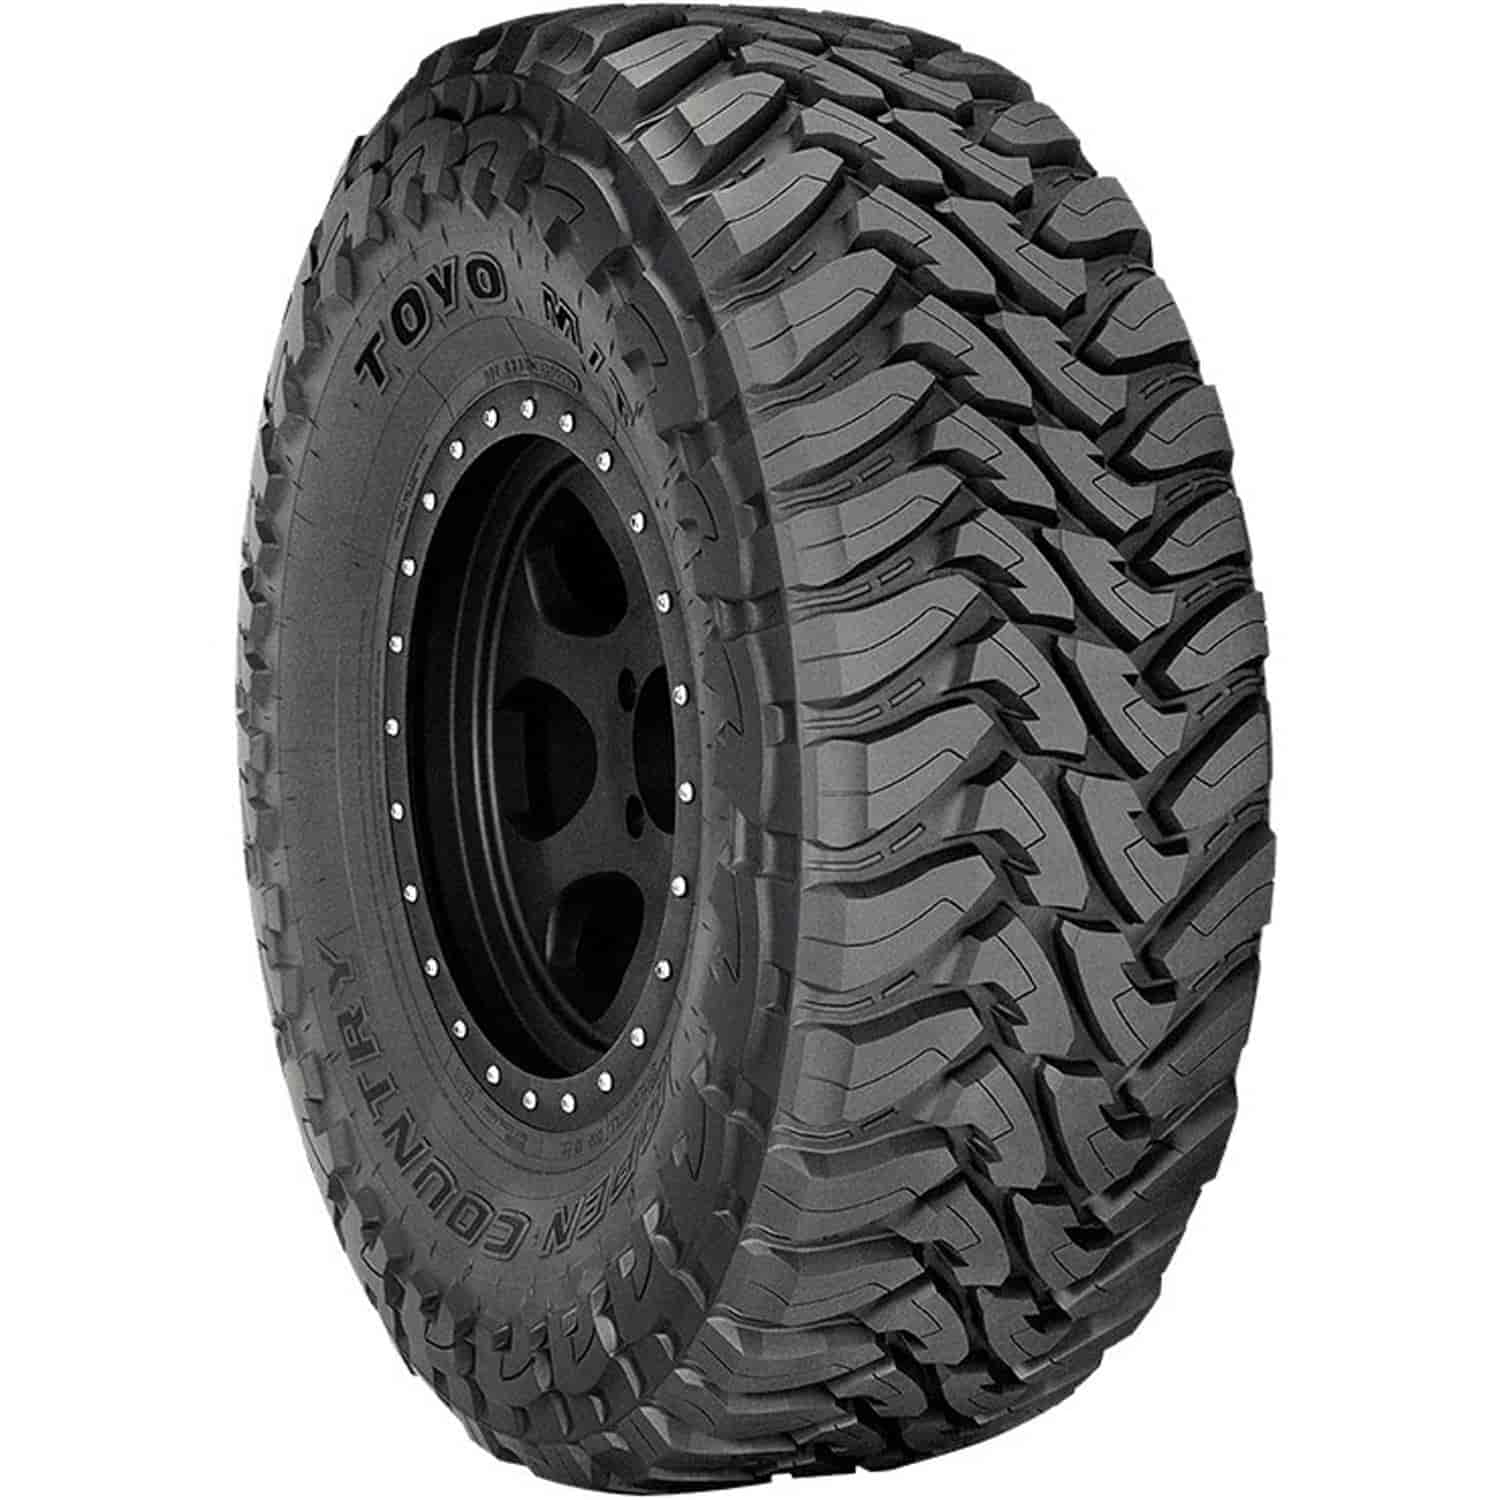 Open Country M/T Tire LT255/80R17